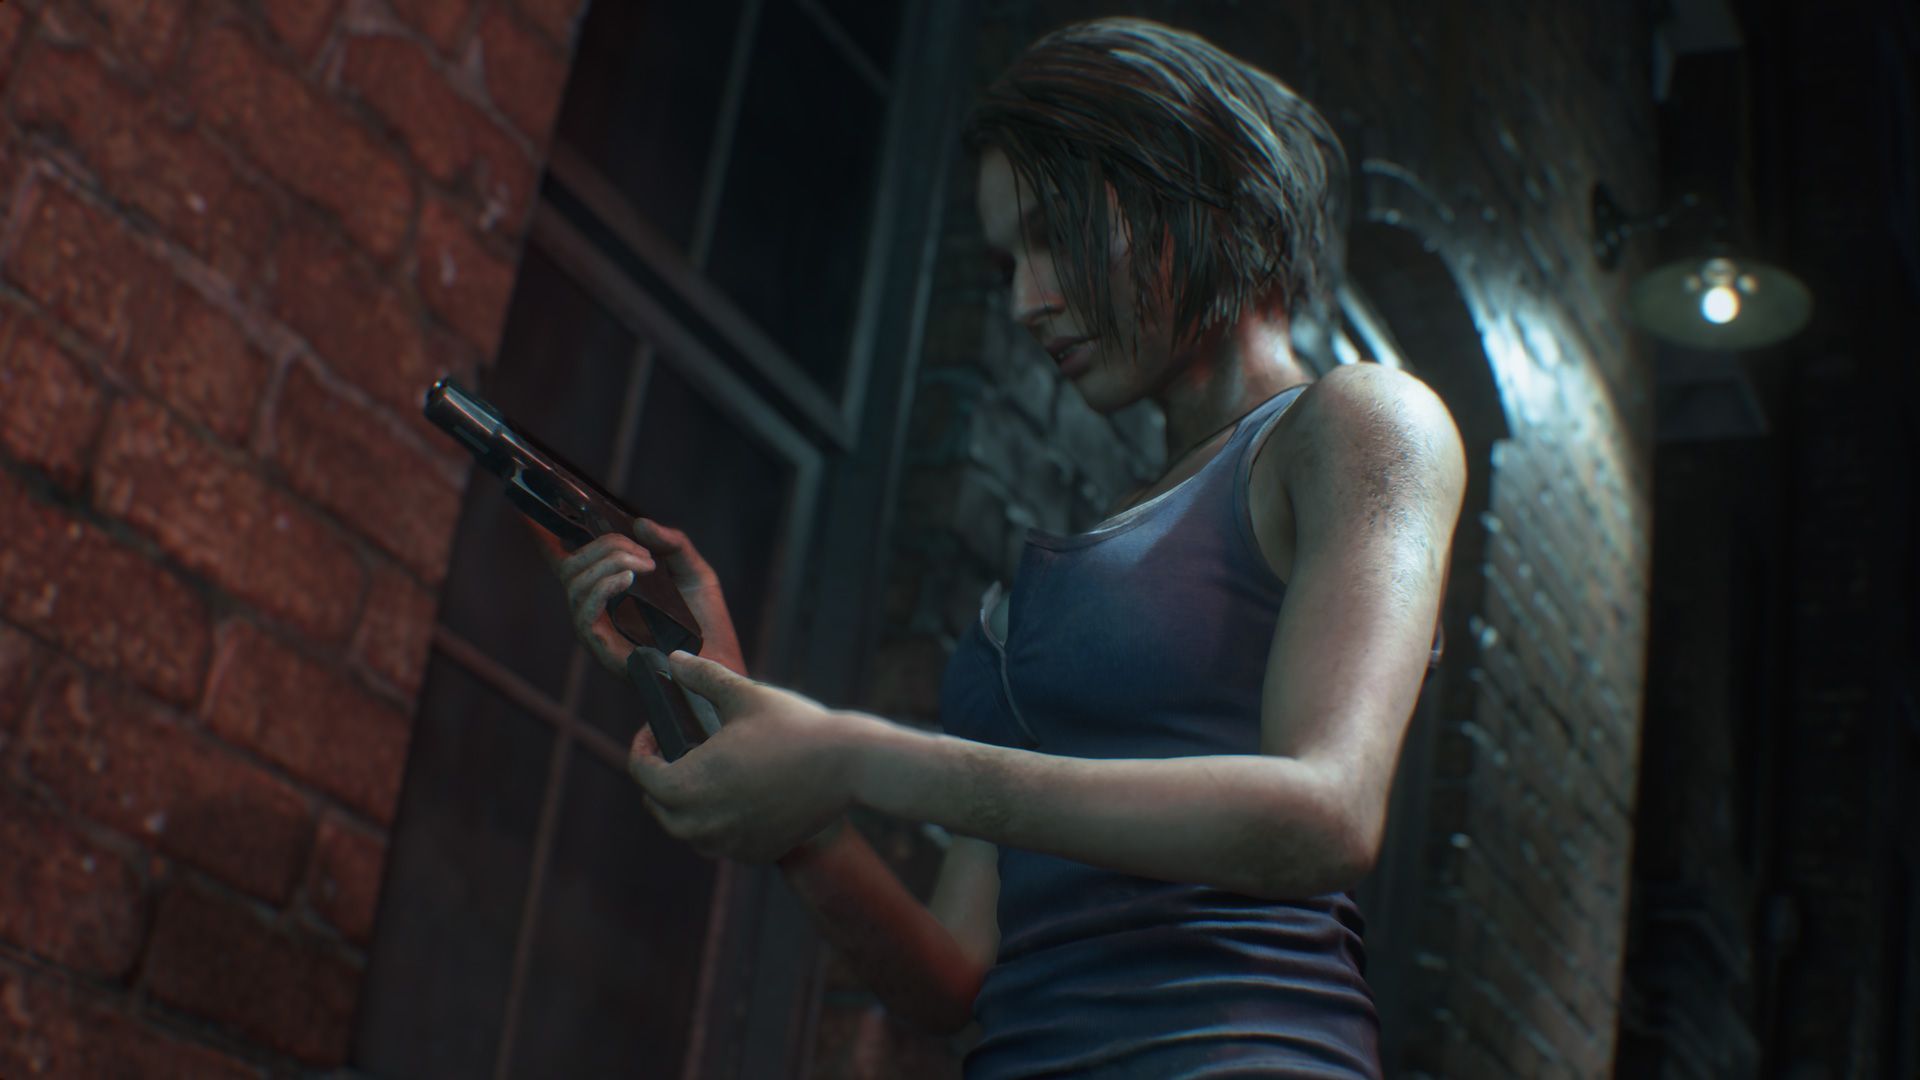 Resident Evil 2 Chasing Jill Achievement: How To Find Jill's